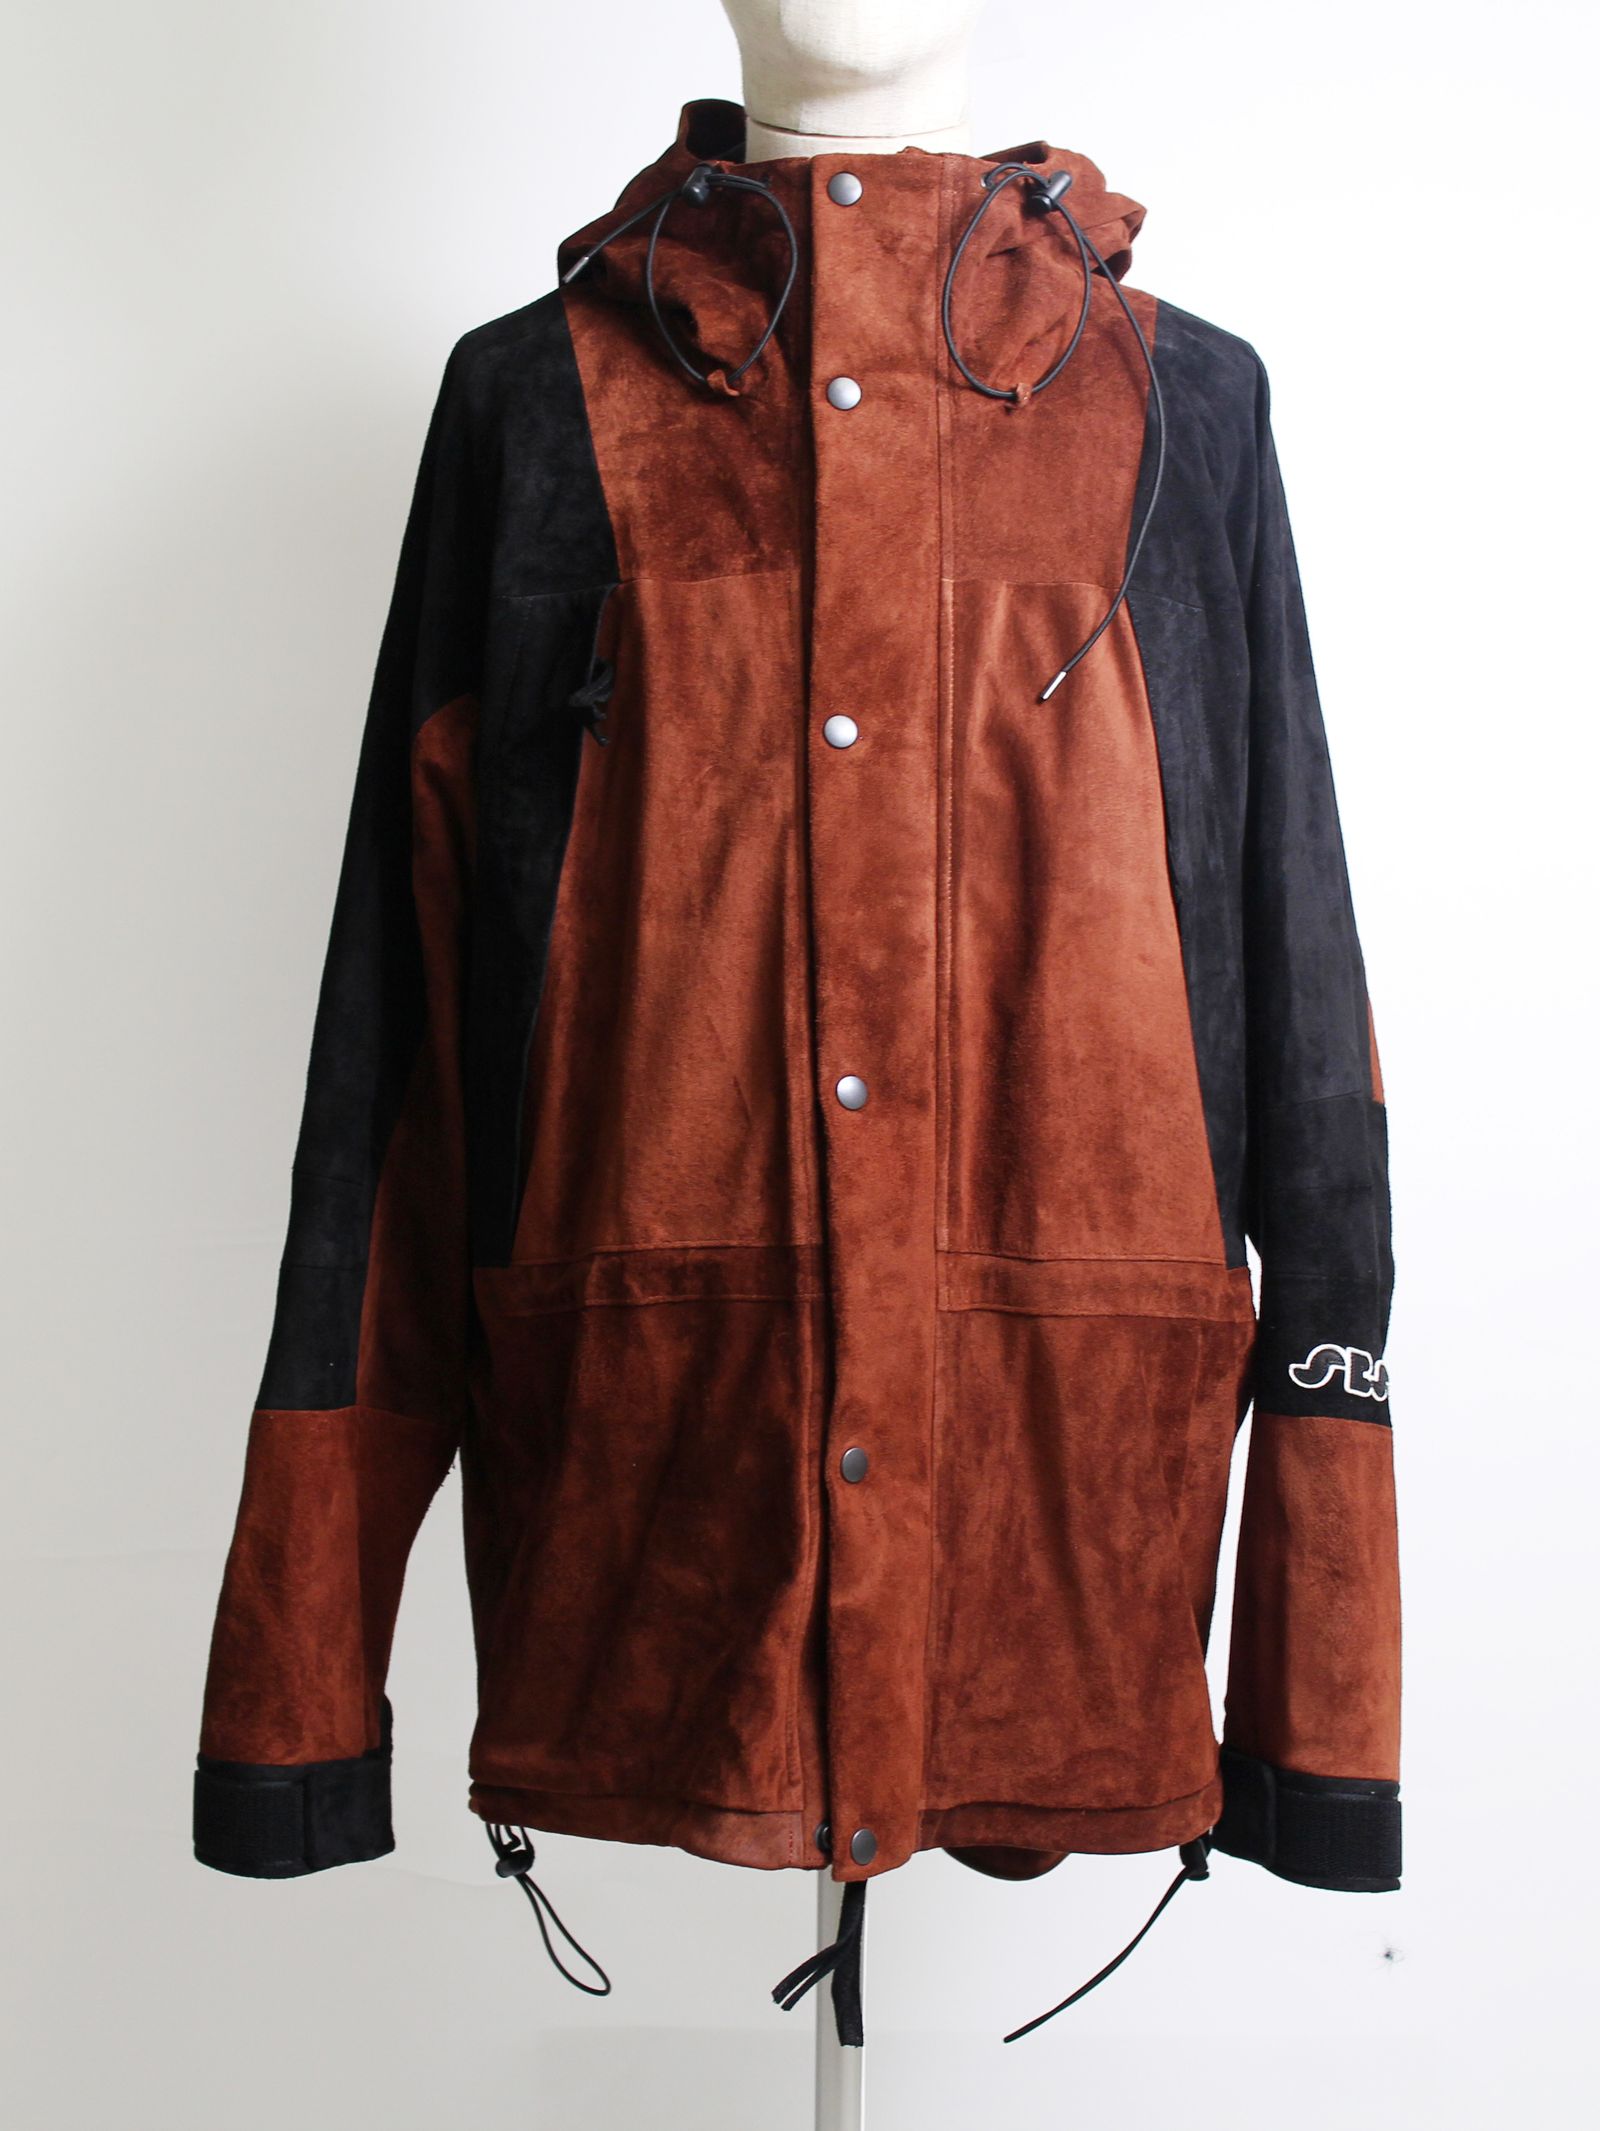 SEVEN BY SEVEN - レザーマウンテンパーカー - LEATHER MOUNTAIN PARKA 